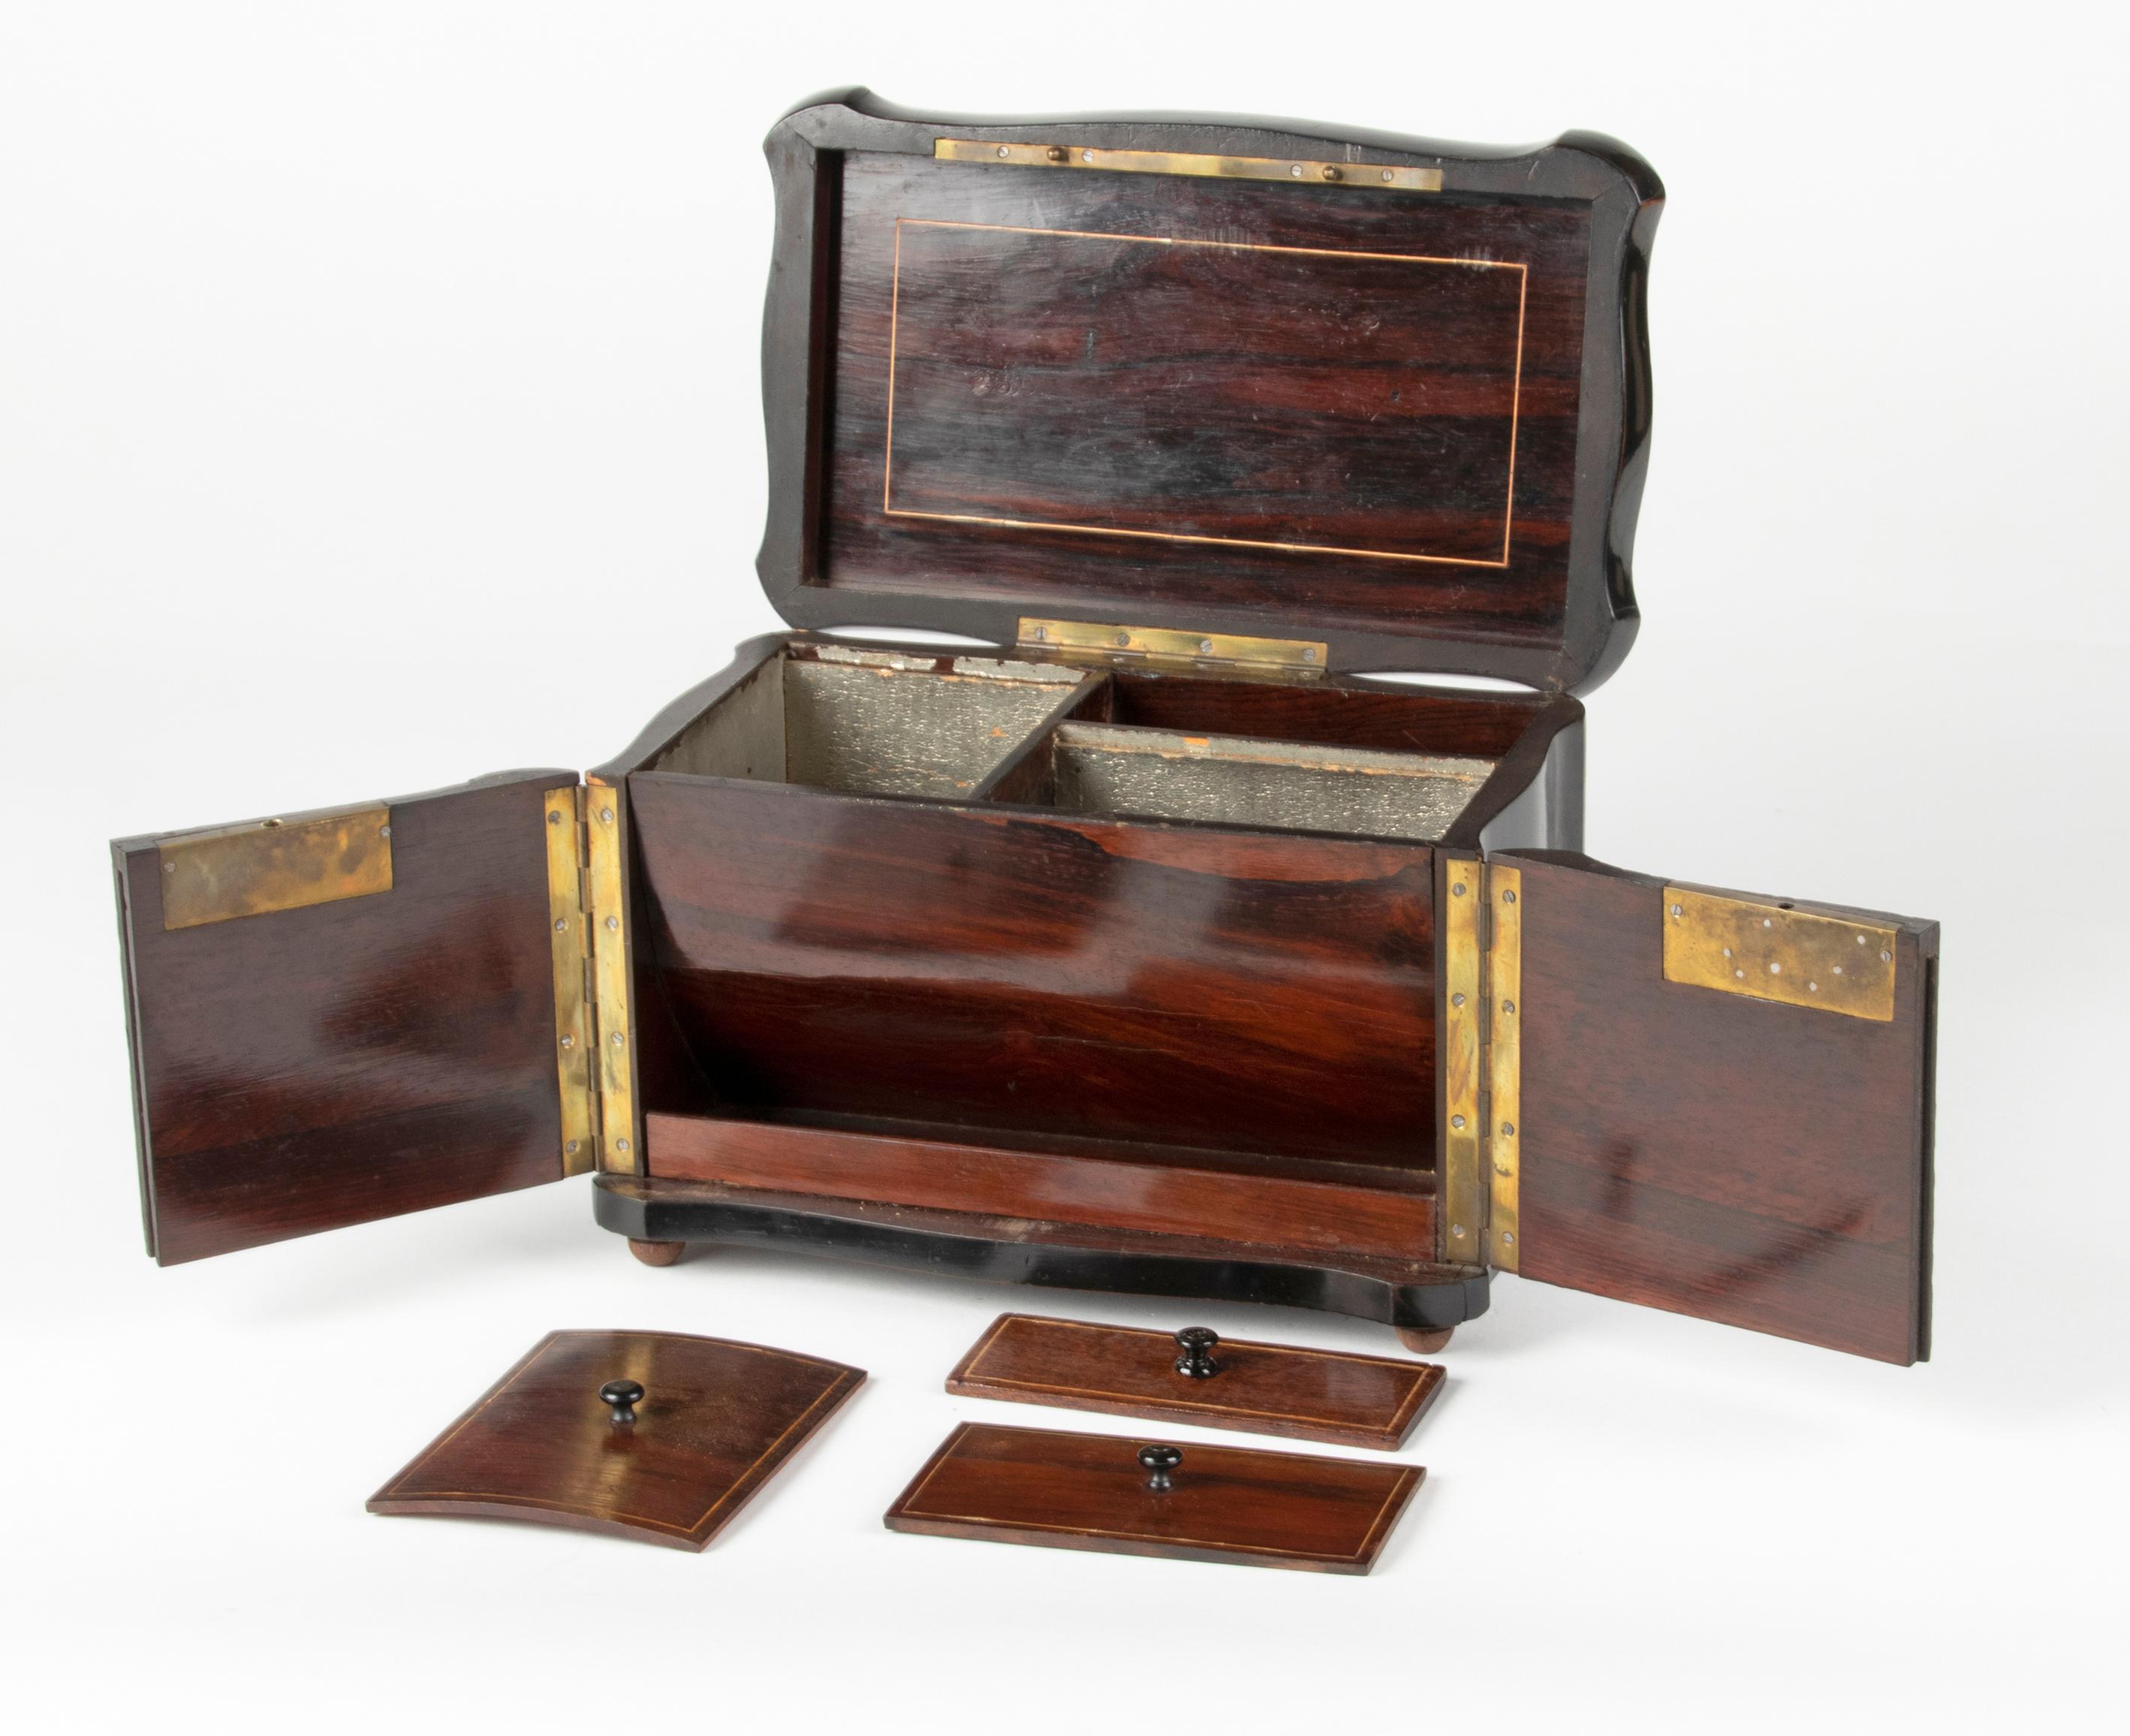 Beautiful antique Napoleon III tea box, crafted of black ebonised wood. The inlay is in Boulle style, marquetry of mother-of-pearl, brass and tortoise. The interior has tree compartments, with mahogany lids. On the front below a small storage